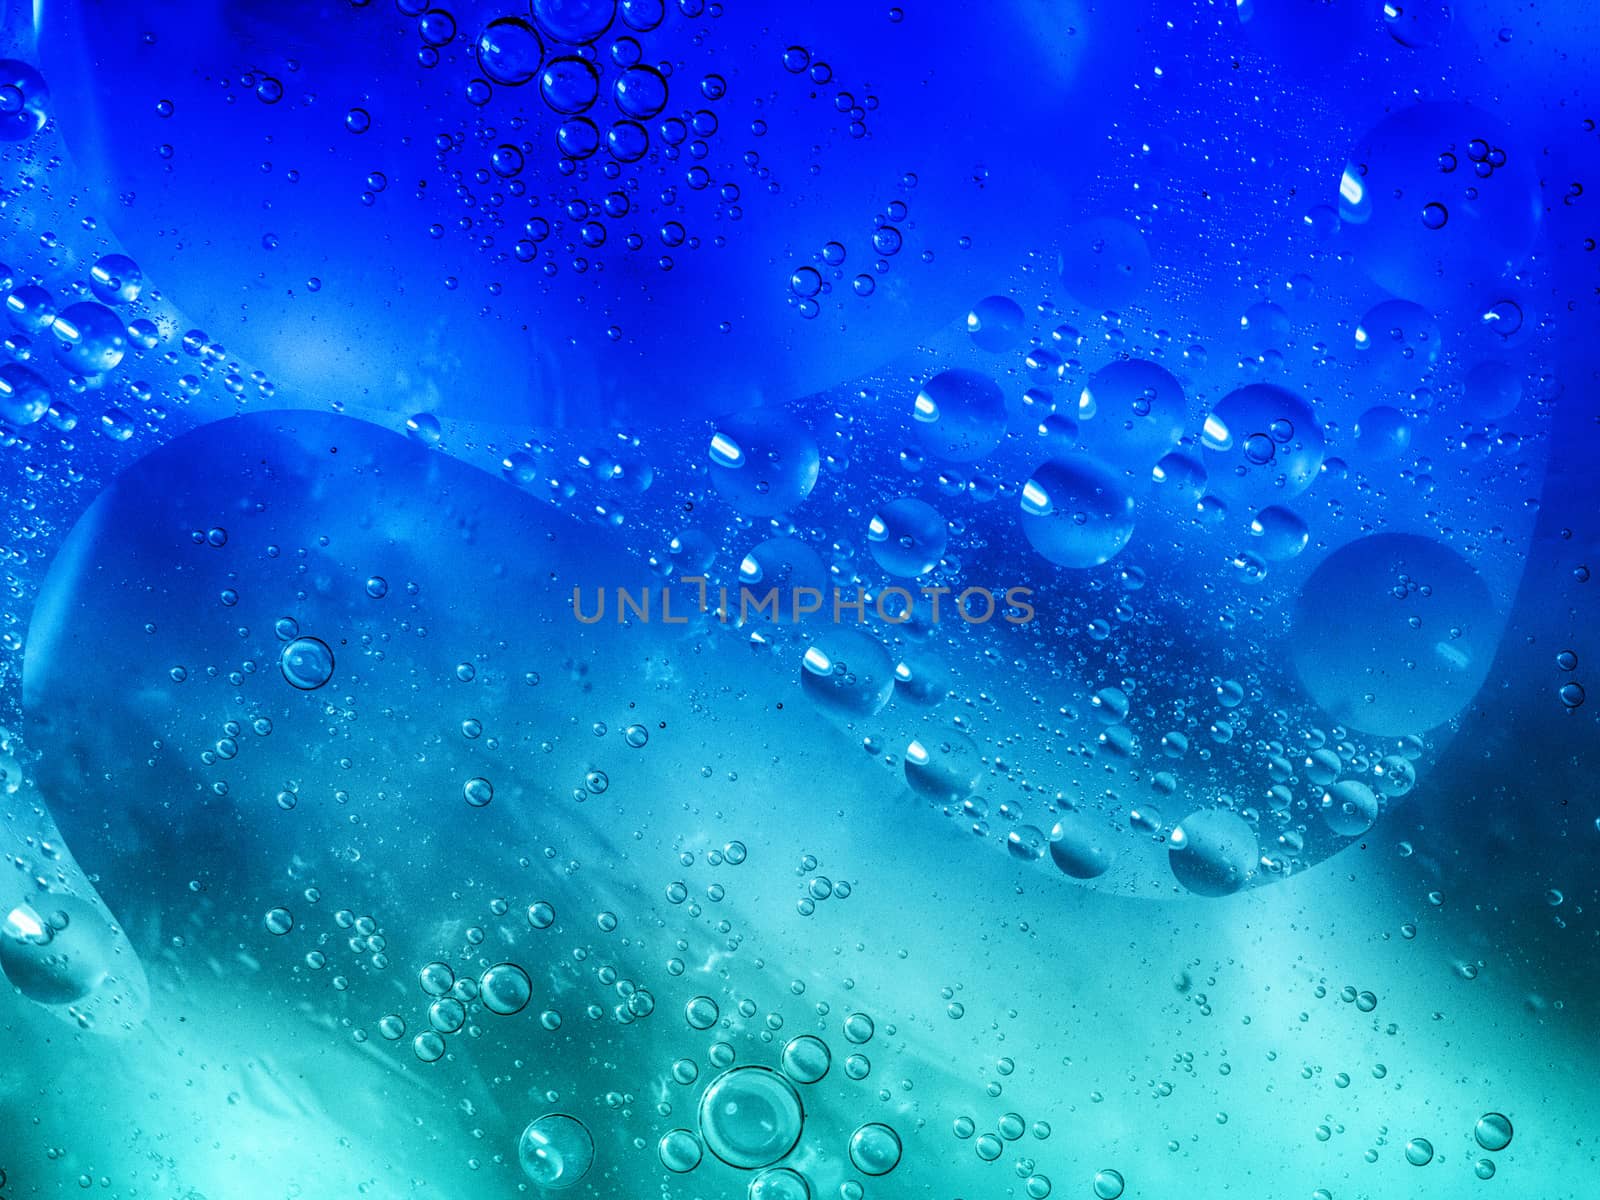 Bubbles in oil and water mixture with blue and green coloring.